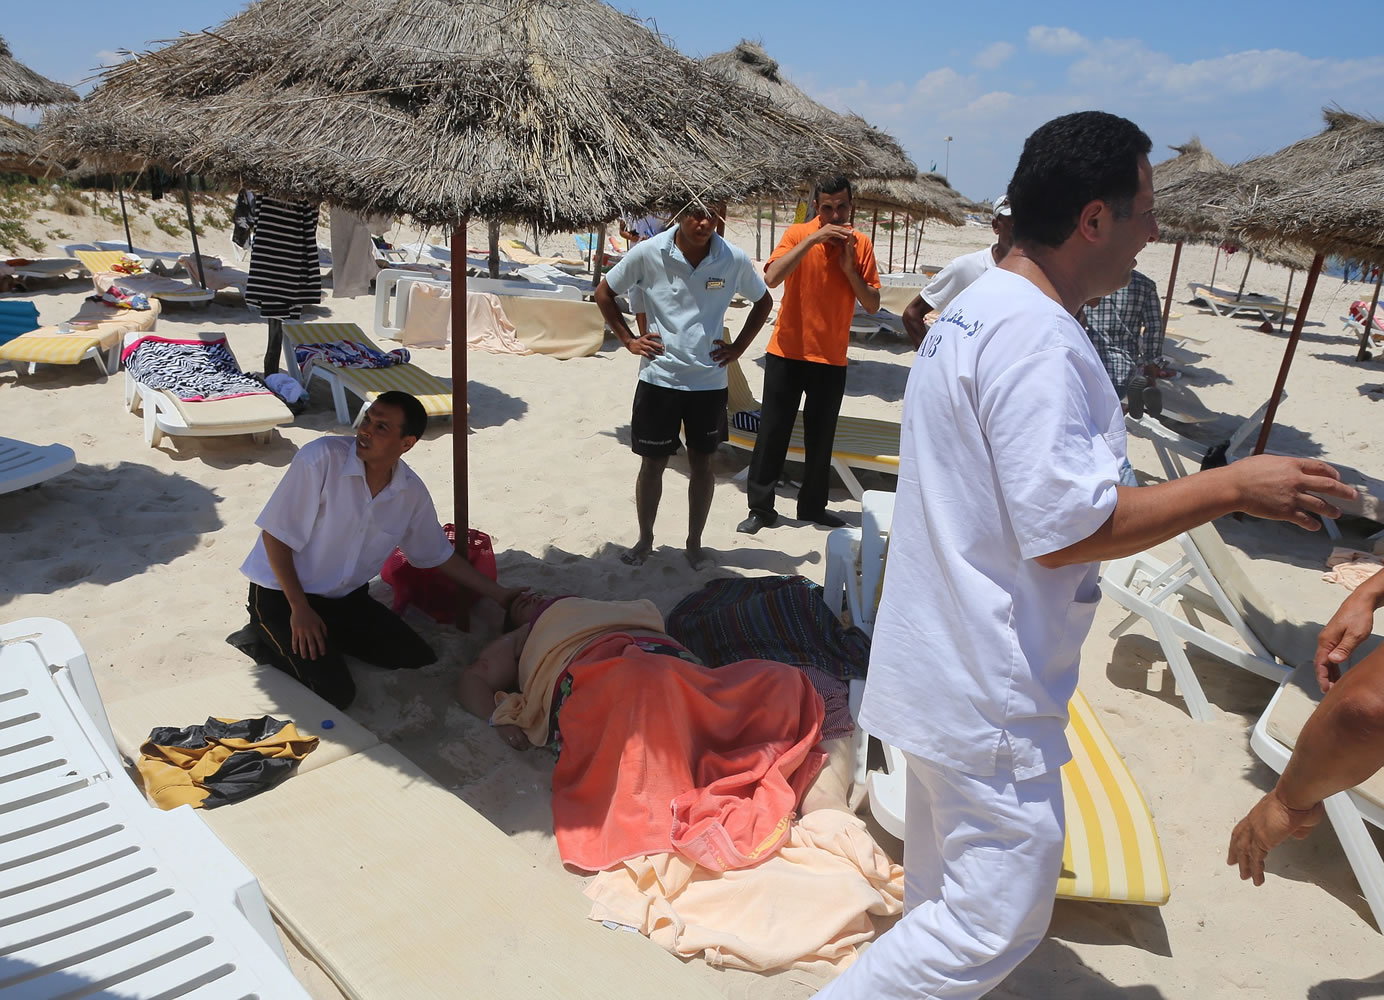 An injured person is treated on a beach Friday in Sousse, Tunisia, where a man opened fire on European sunbathers at a resort.